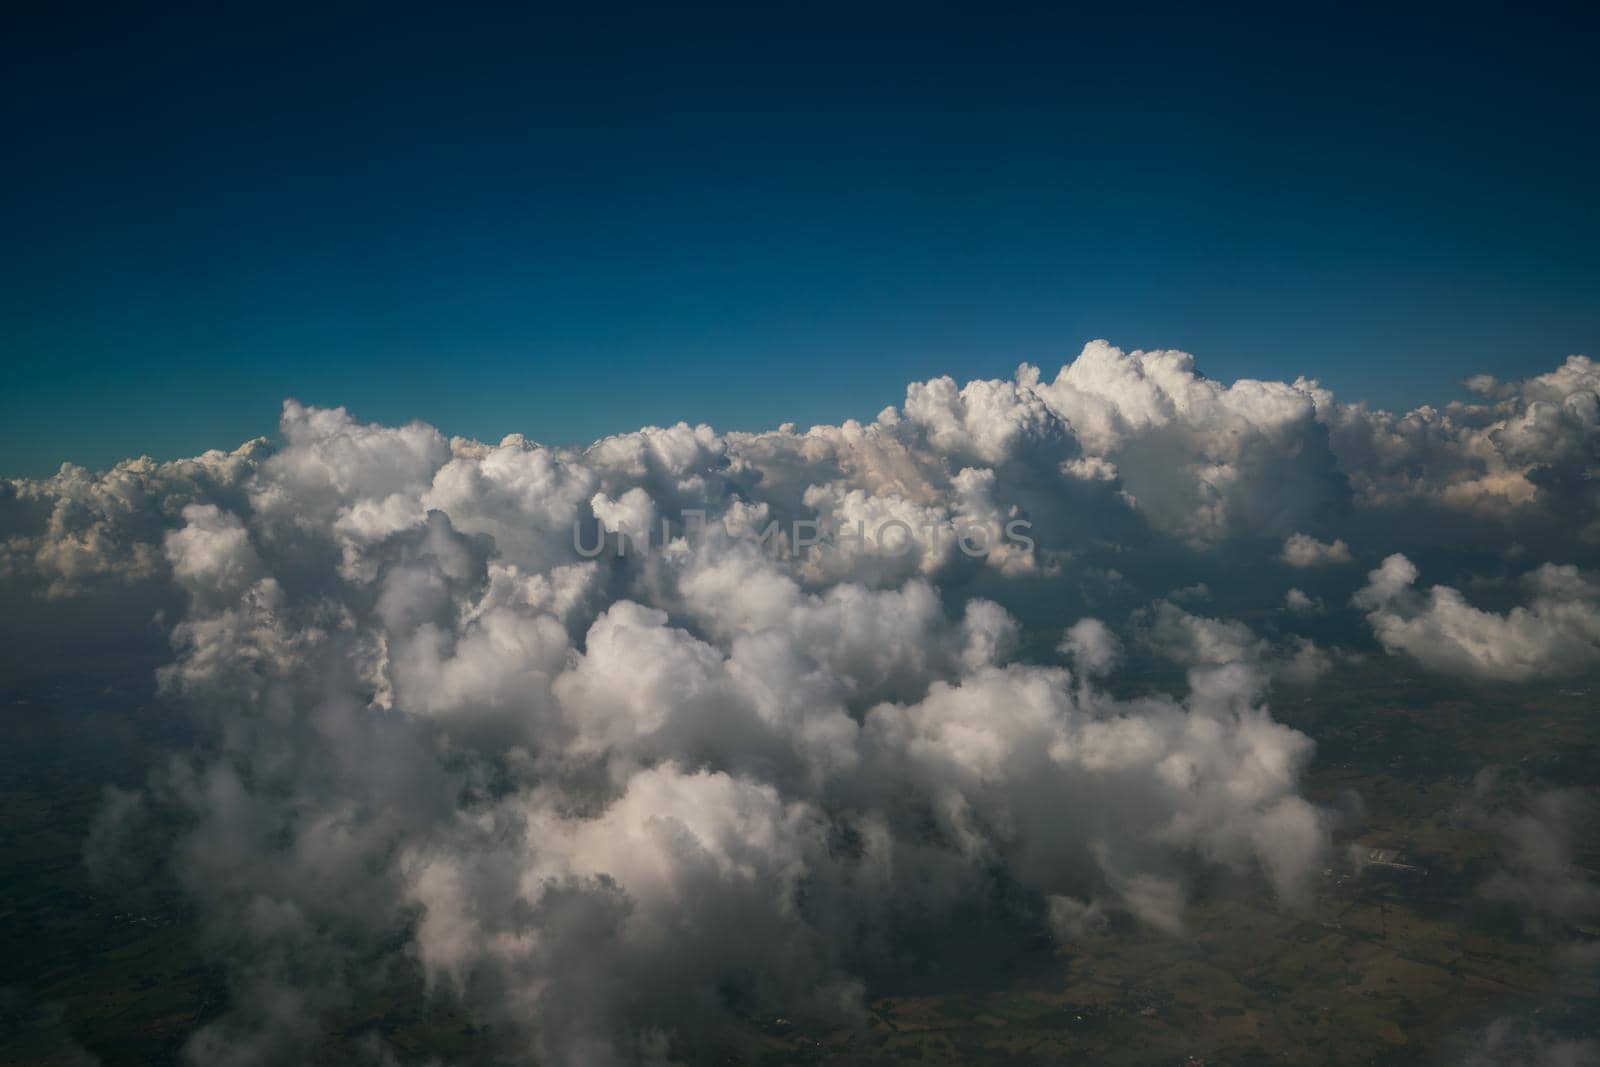 Landscape viewed from airplane by biancoblue